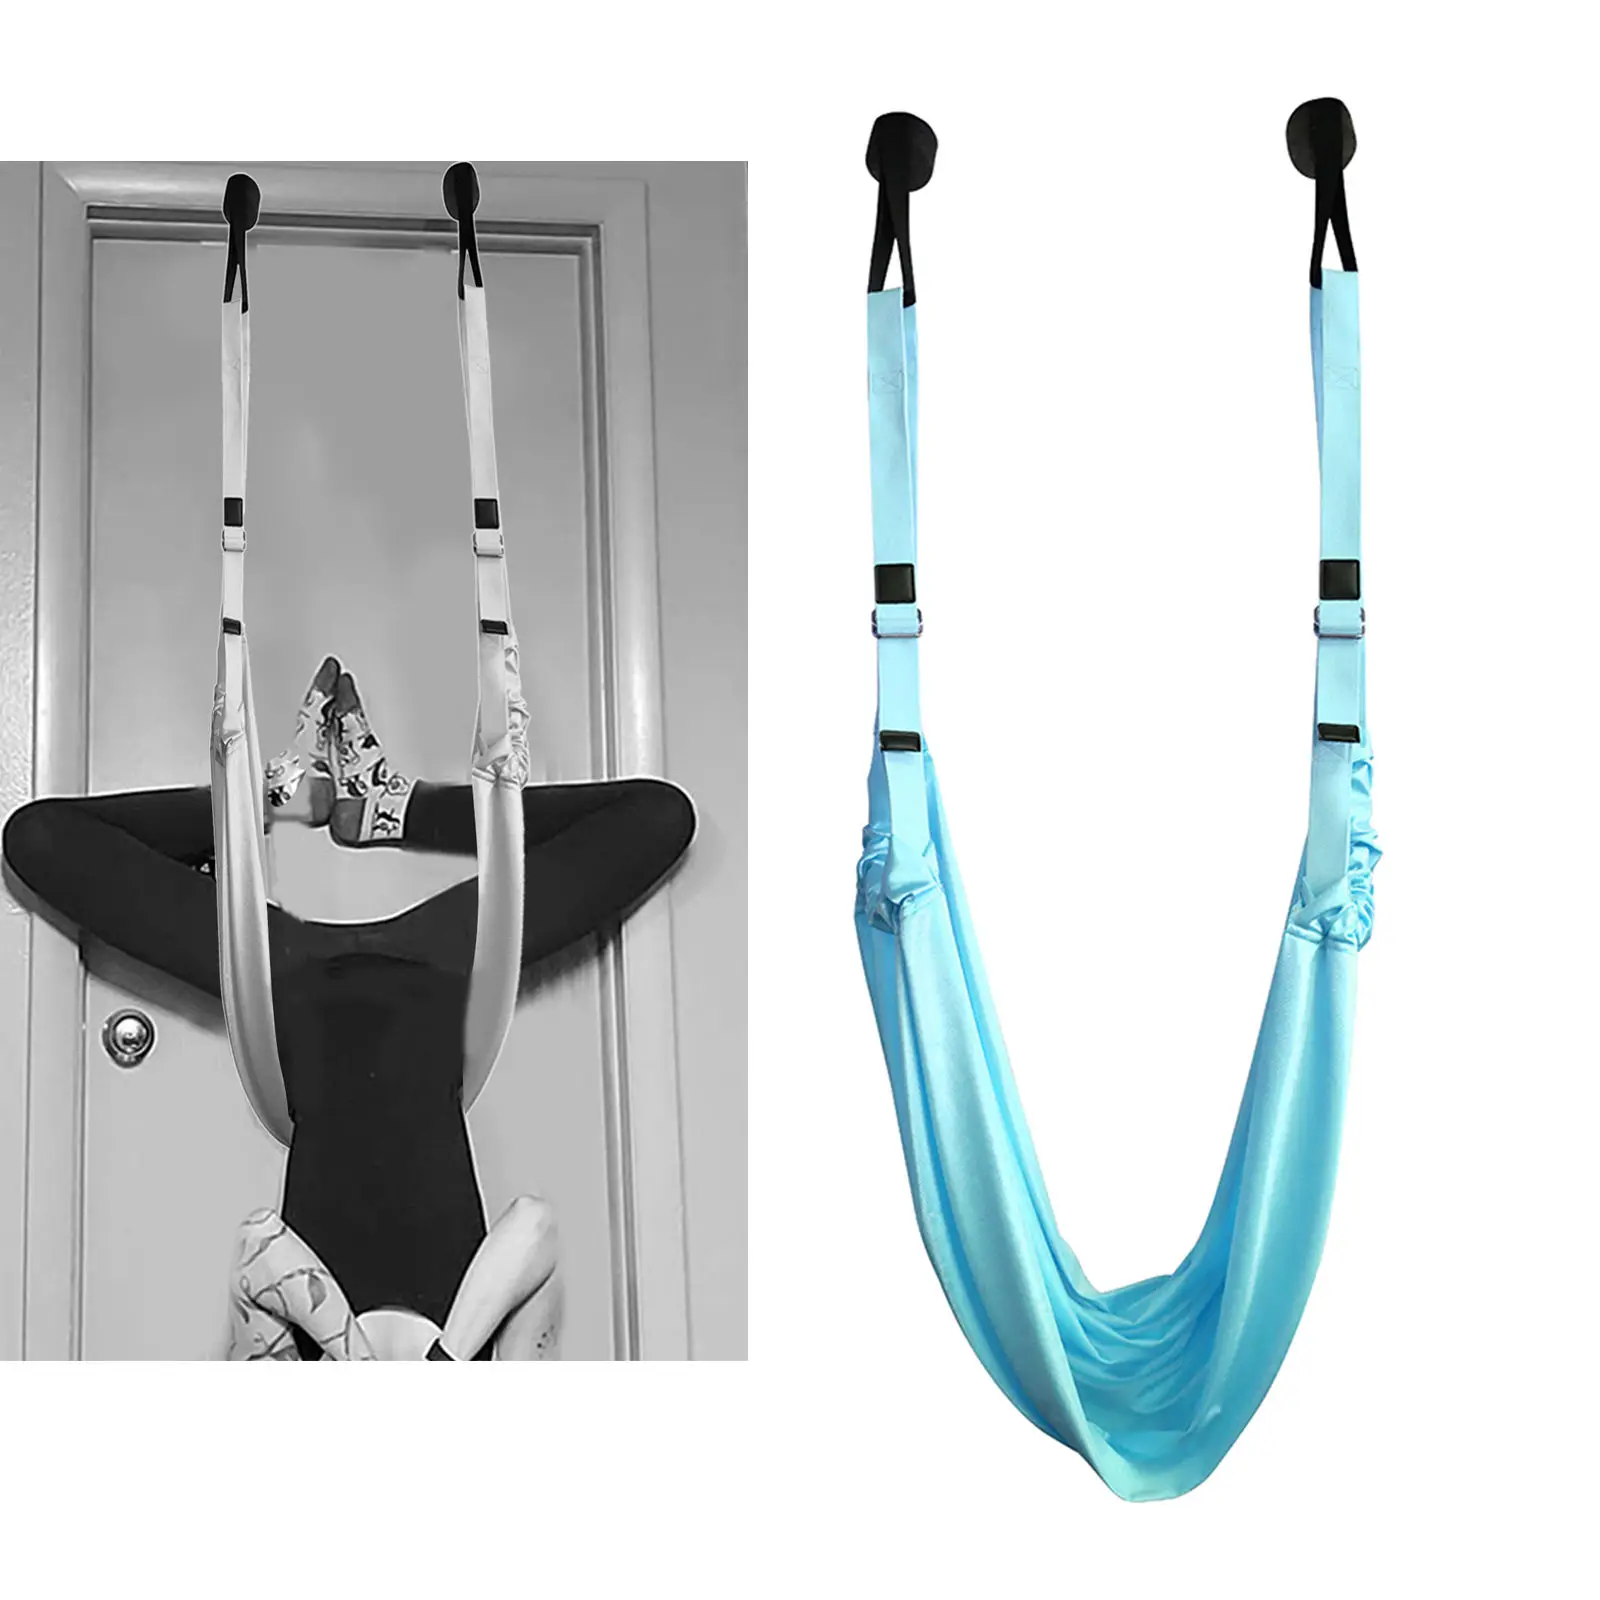 Aerial Yoga Swing Set, Strong Extension,Antigravity Ceiling ing Yoga Sling Inversion Exercises